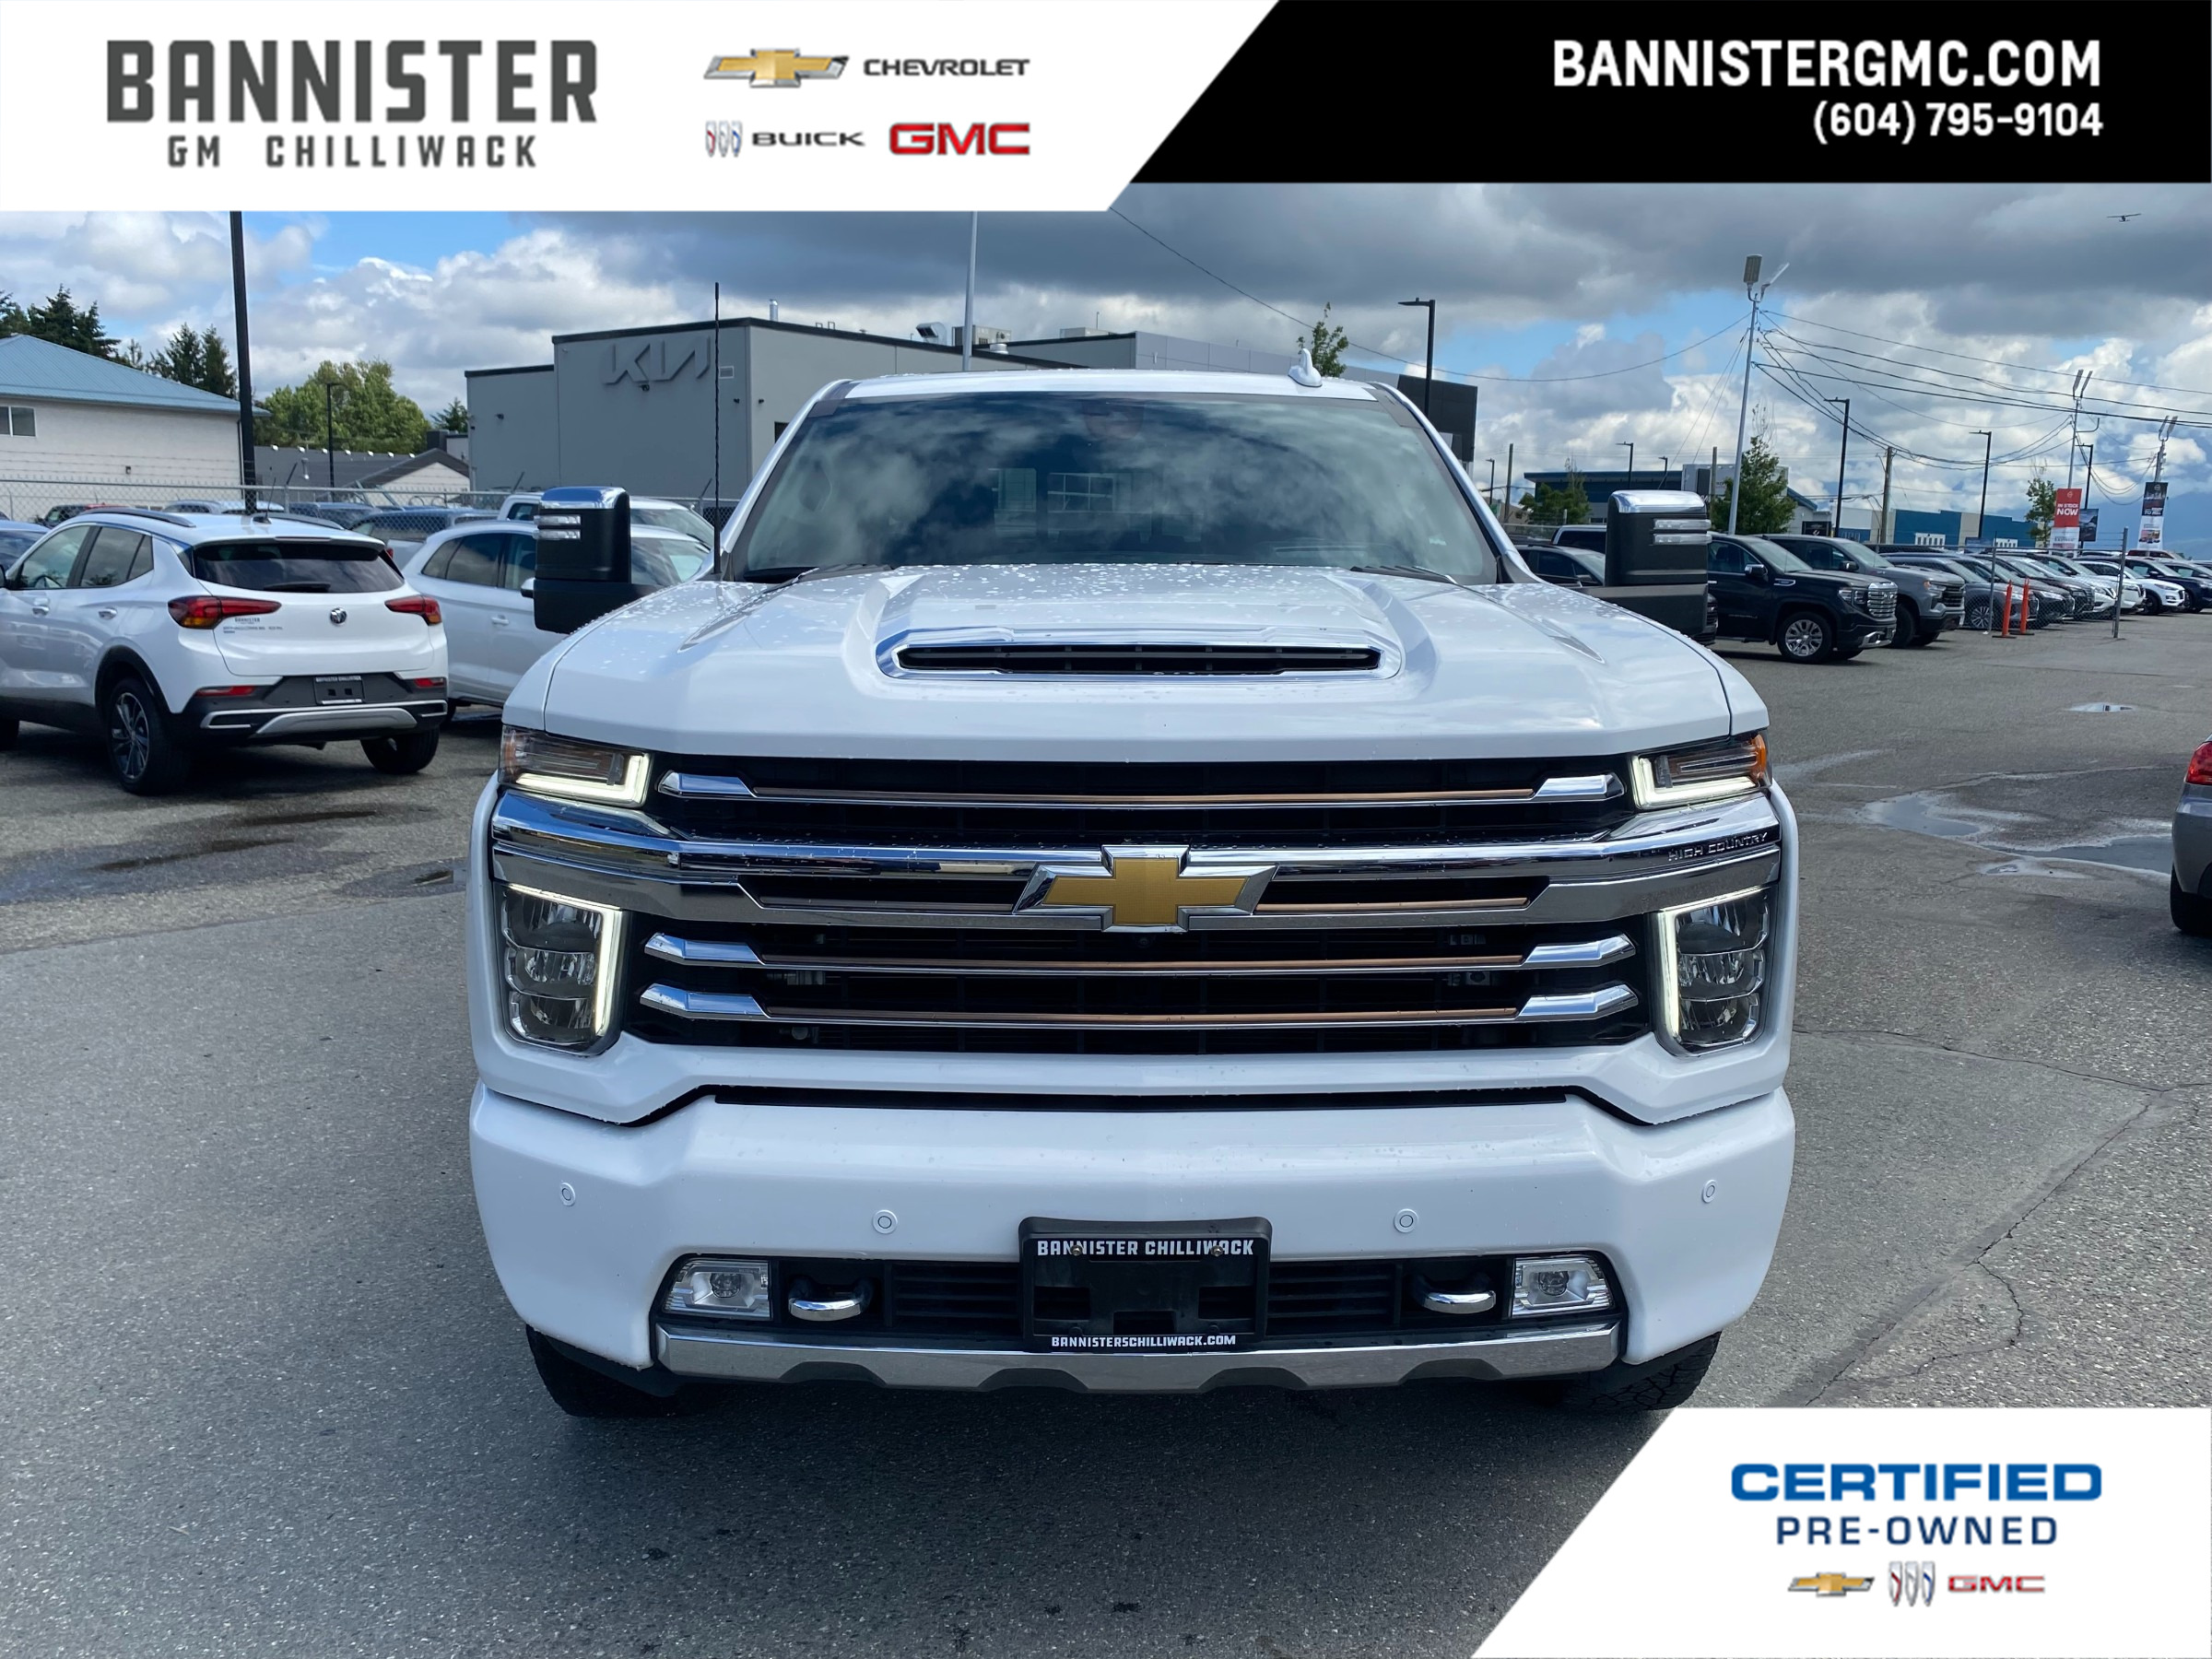 2022 Chevrolet SILVERADO 2500HD High Country CERTIFIED PRE-OWNED RATES AS LOW AS 4